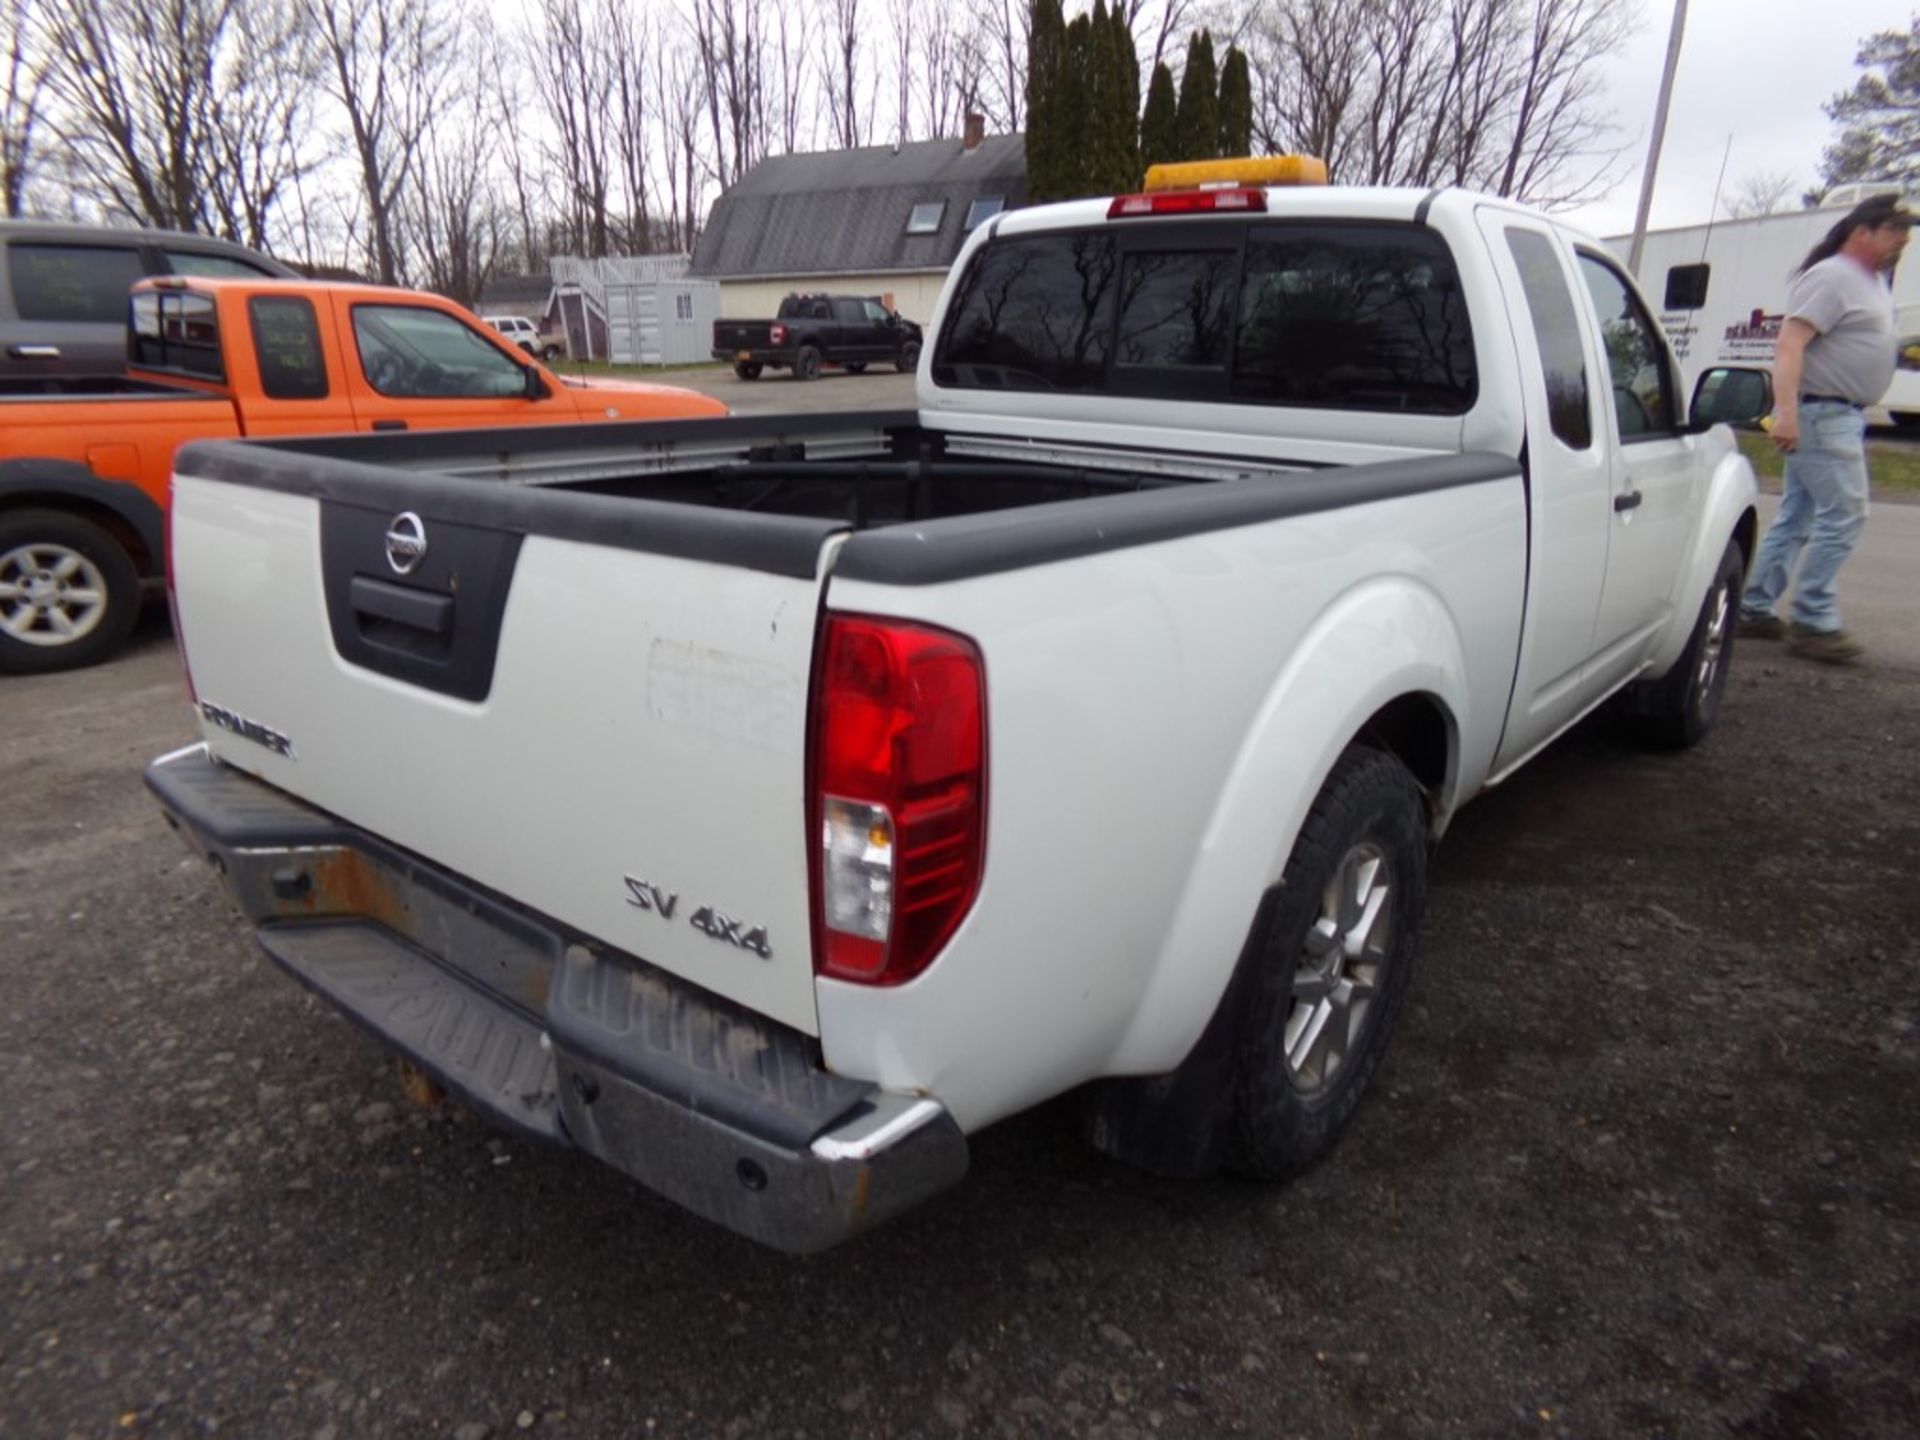 2015 Nissan Frontier SV 4 x 4 Ext. Cab, White, 126,409 Miles, Orange Light on Roof, SOME SURFACE - Image 3 of 11